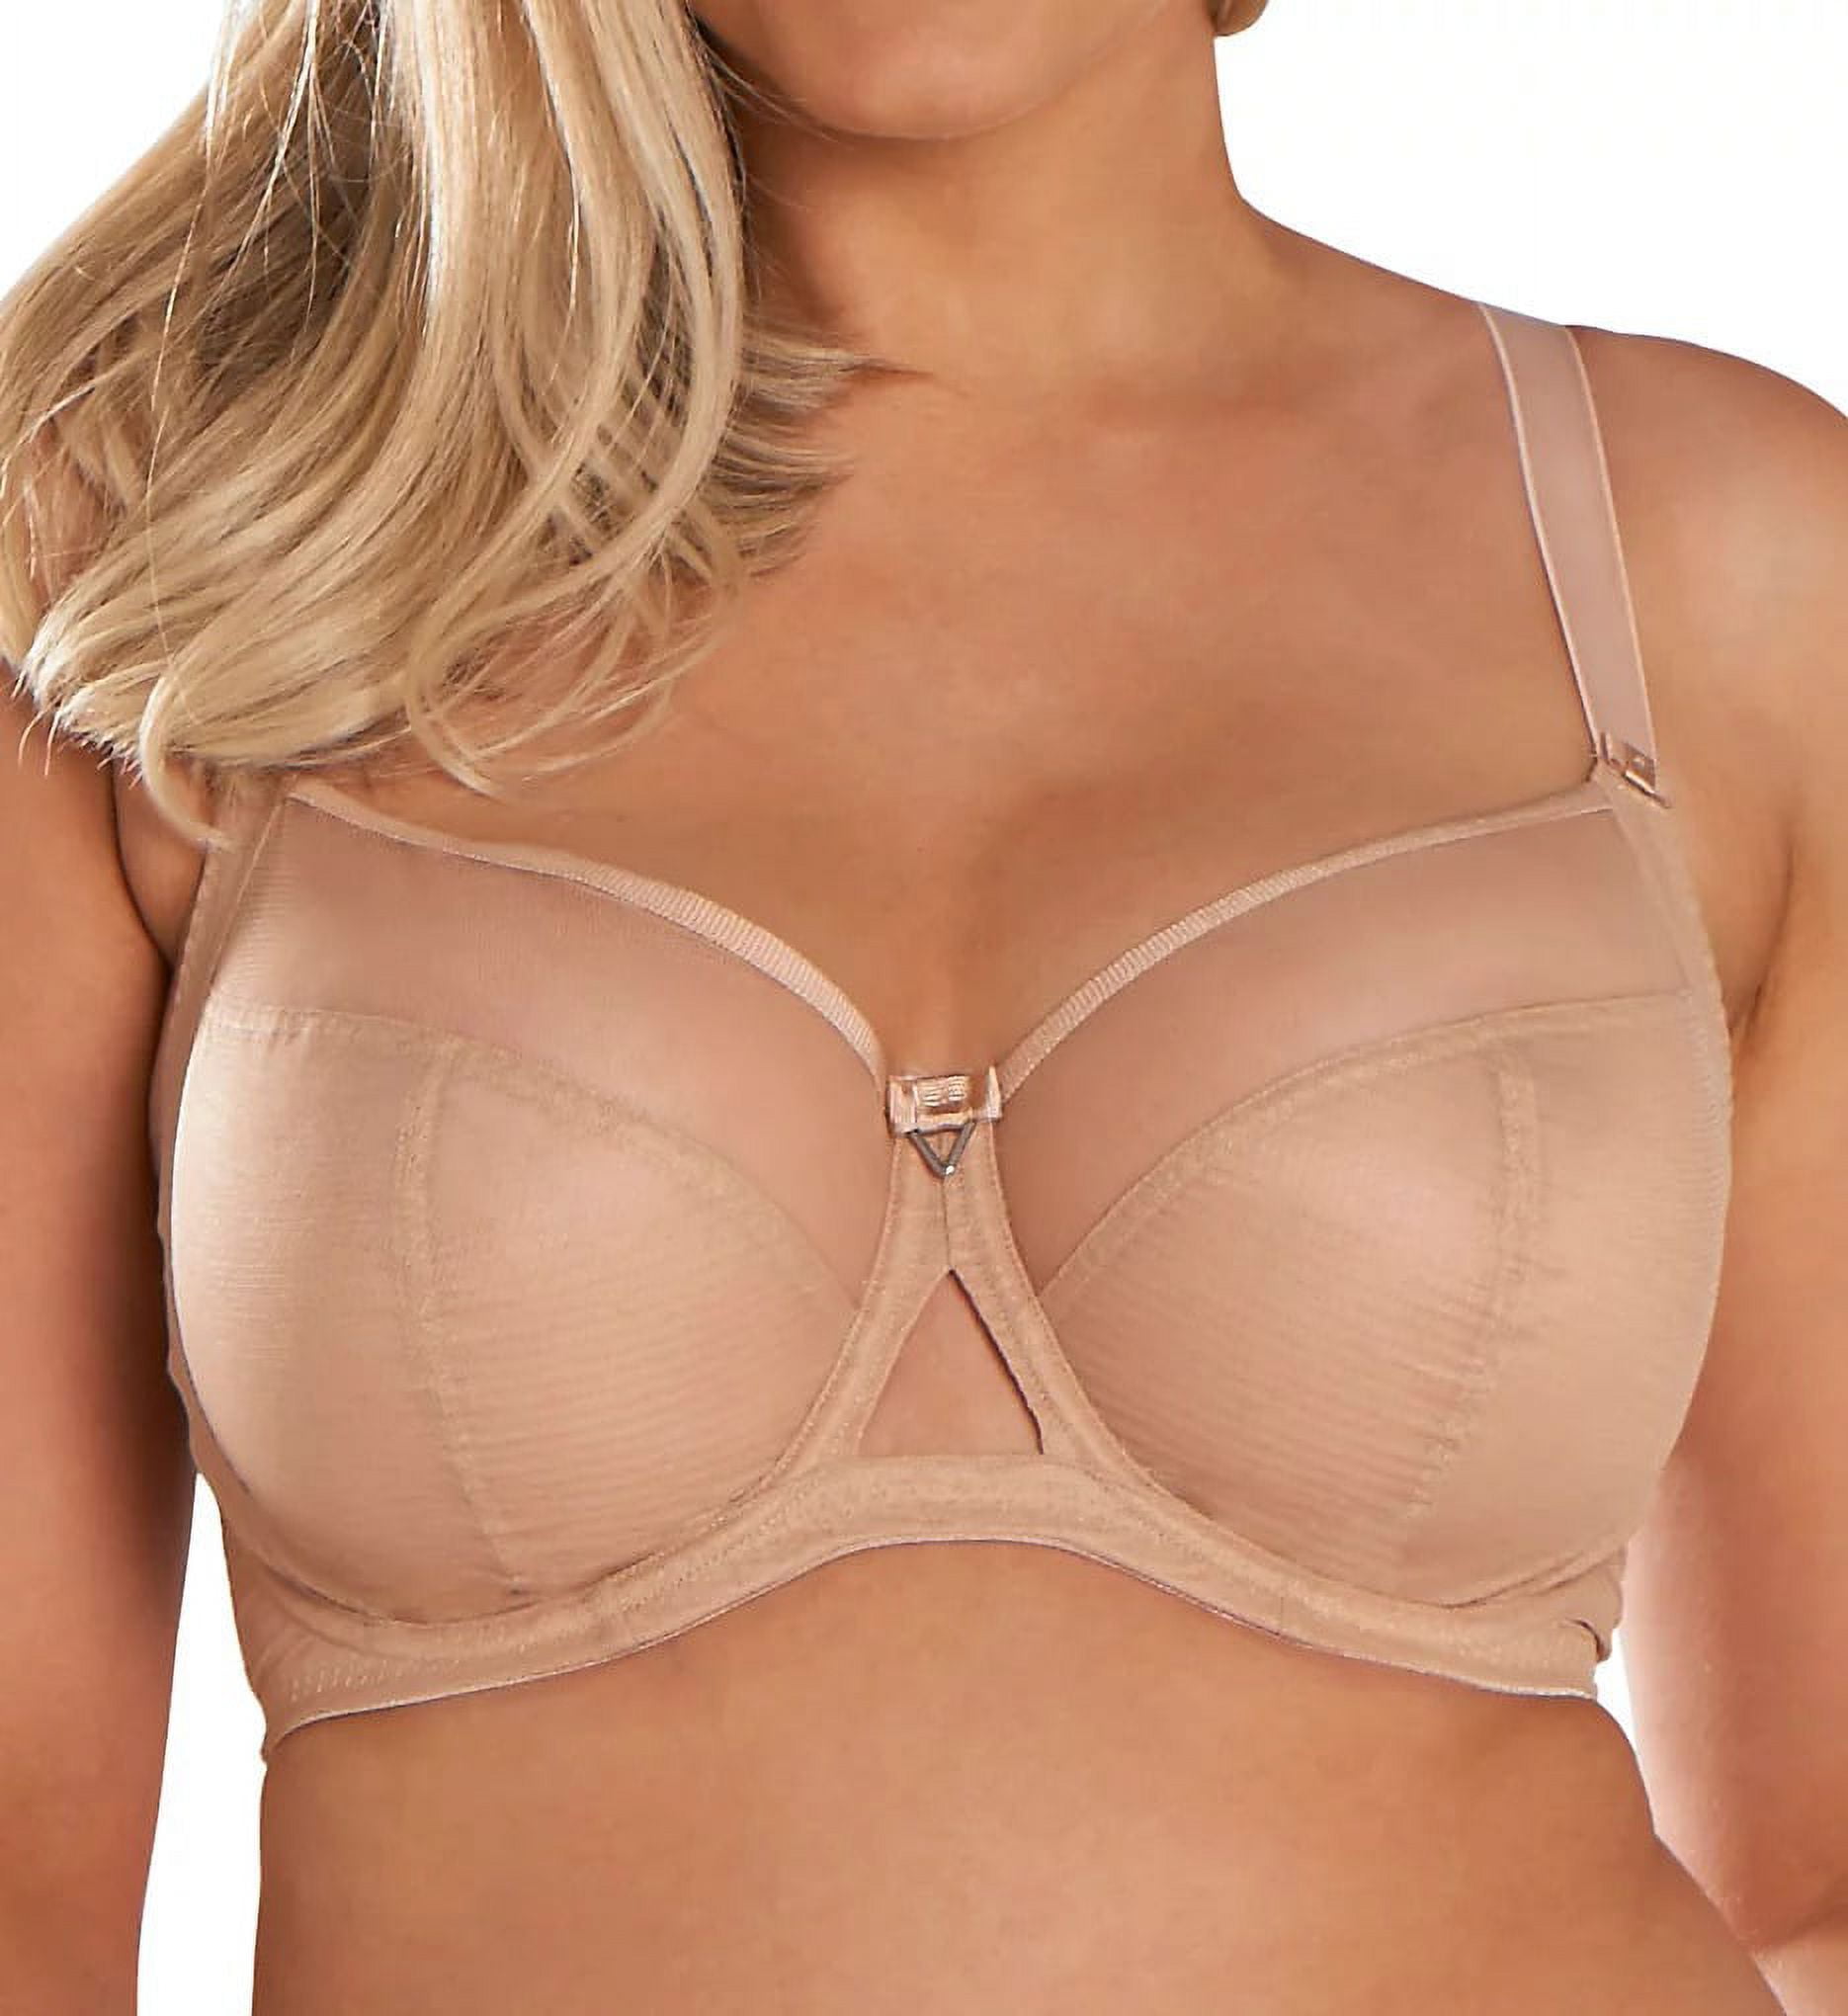 How Big Is a 38D Bra Cup Size?